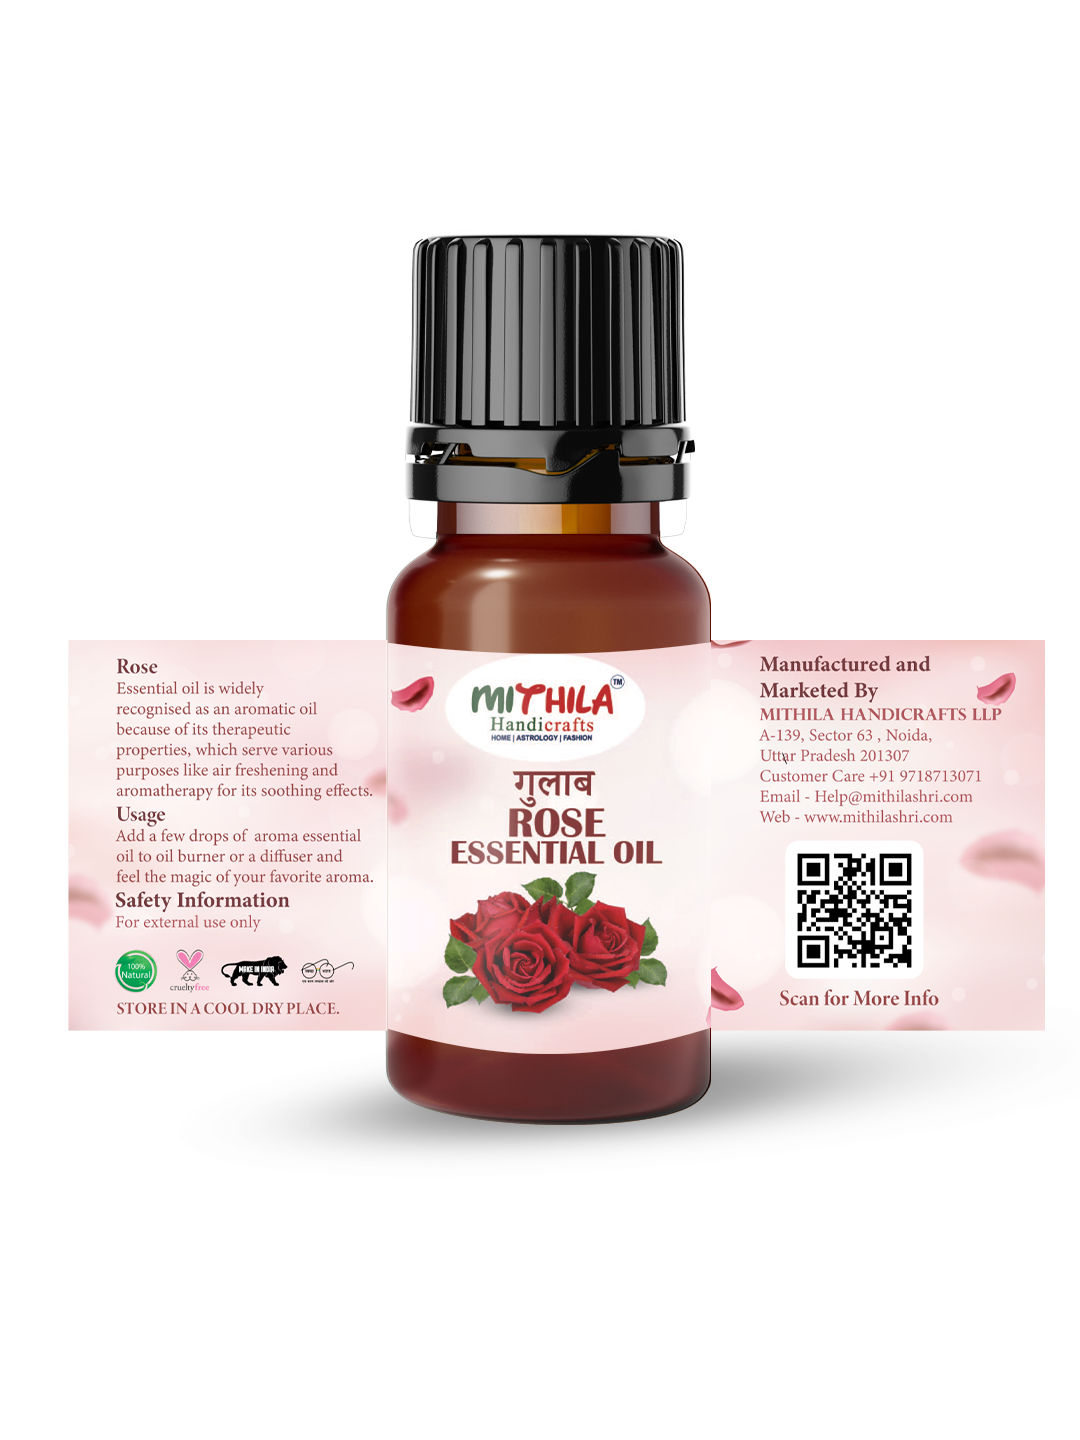 Rose Essential Oil For Skin, Hair Care, Home Fragrance, Aroma Therapy 40ml